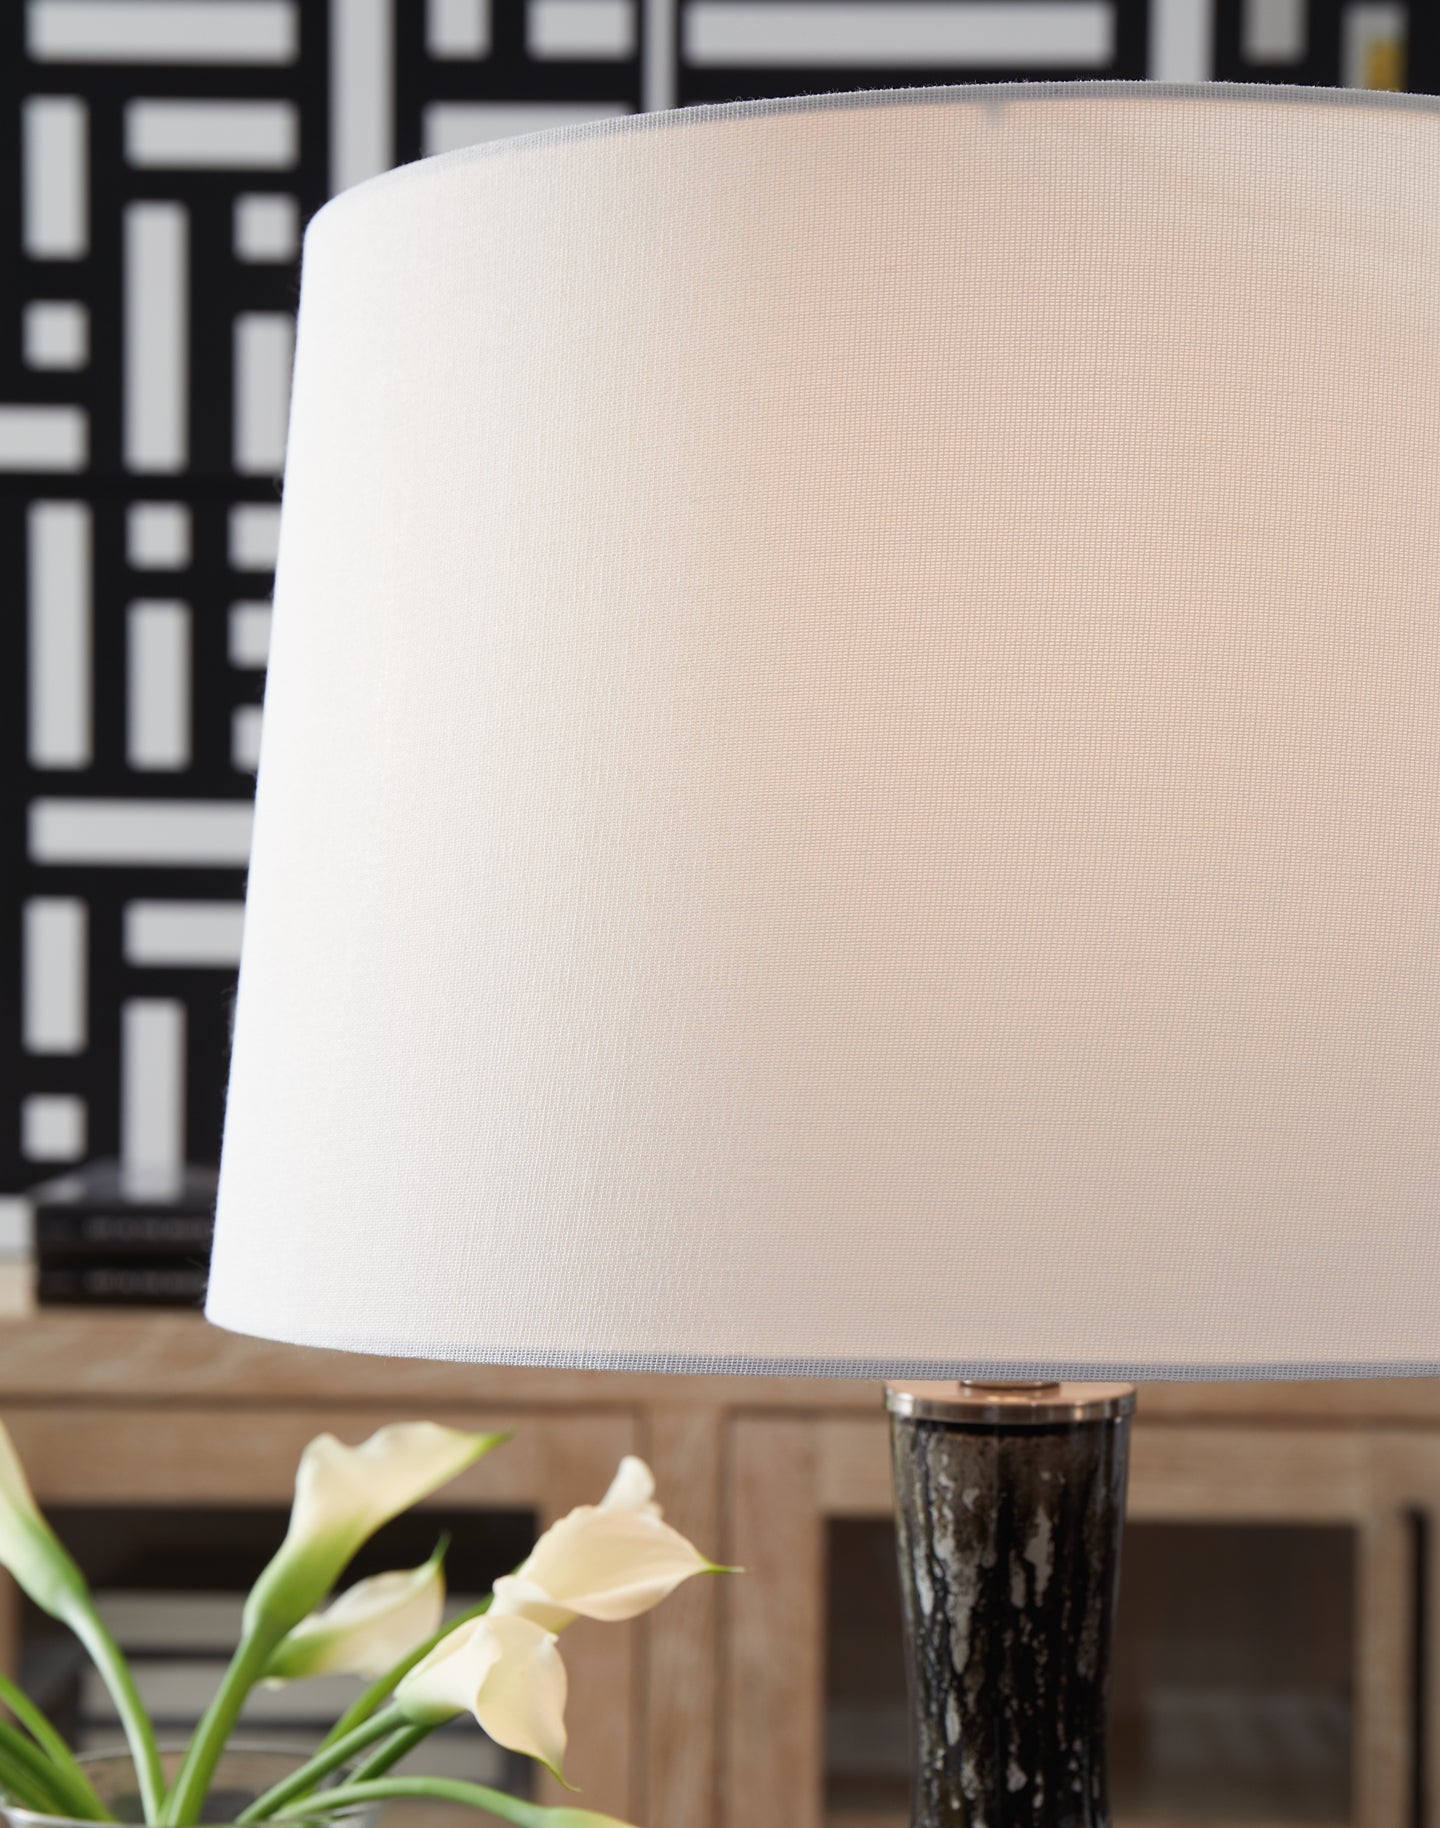 Tenslow Glass Table Lamp (1/CN) Signature Design by Ashley®